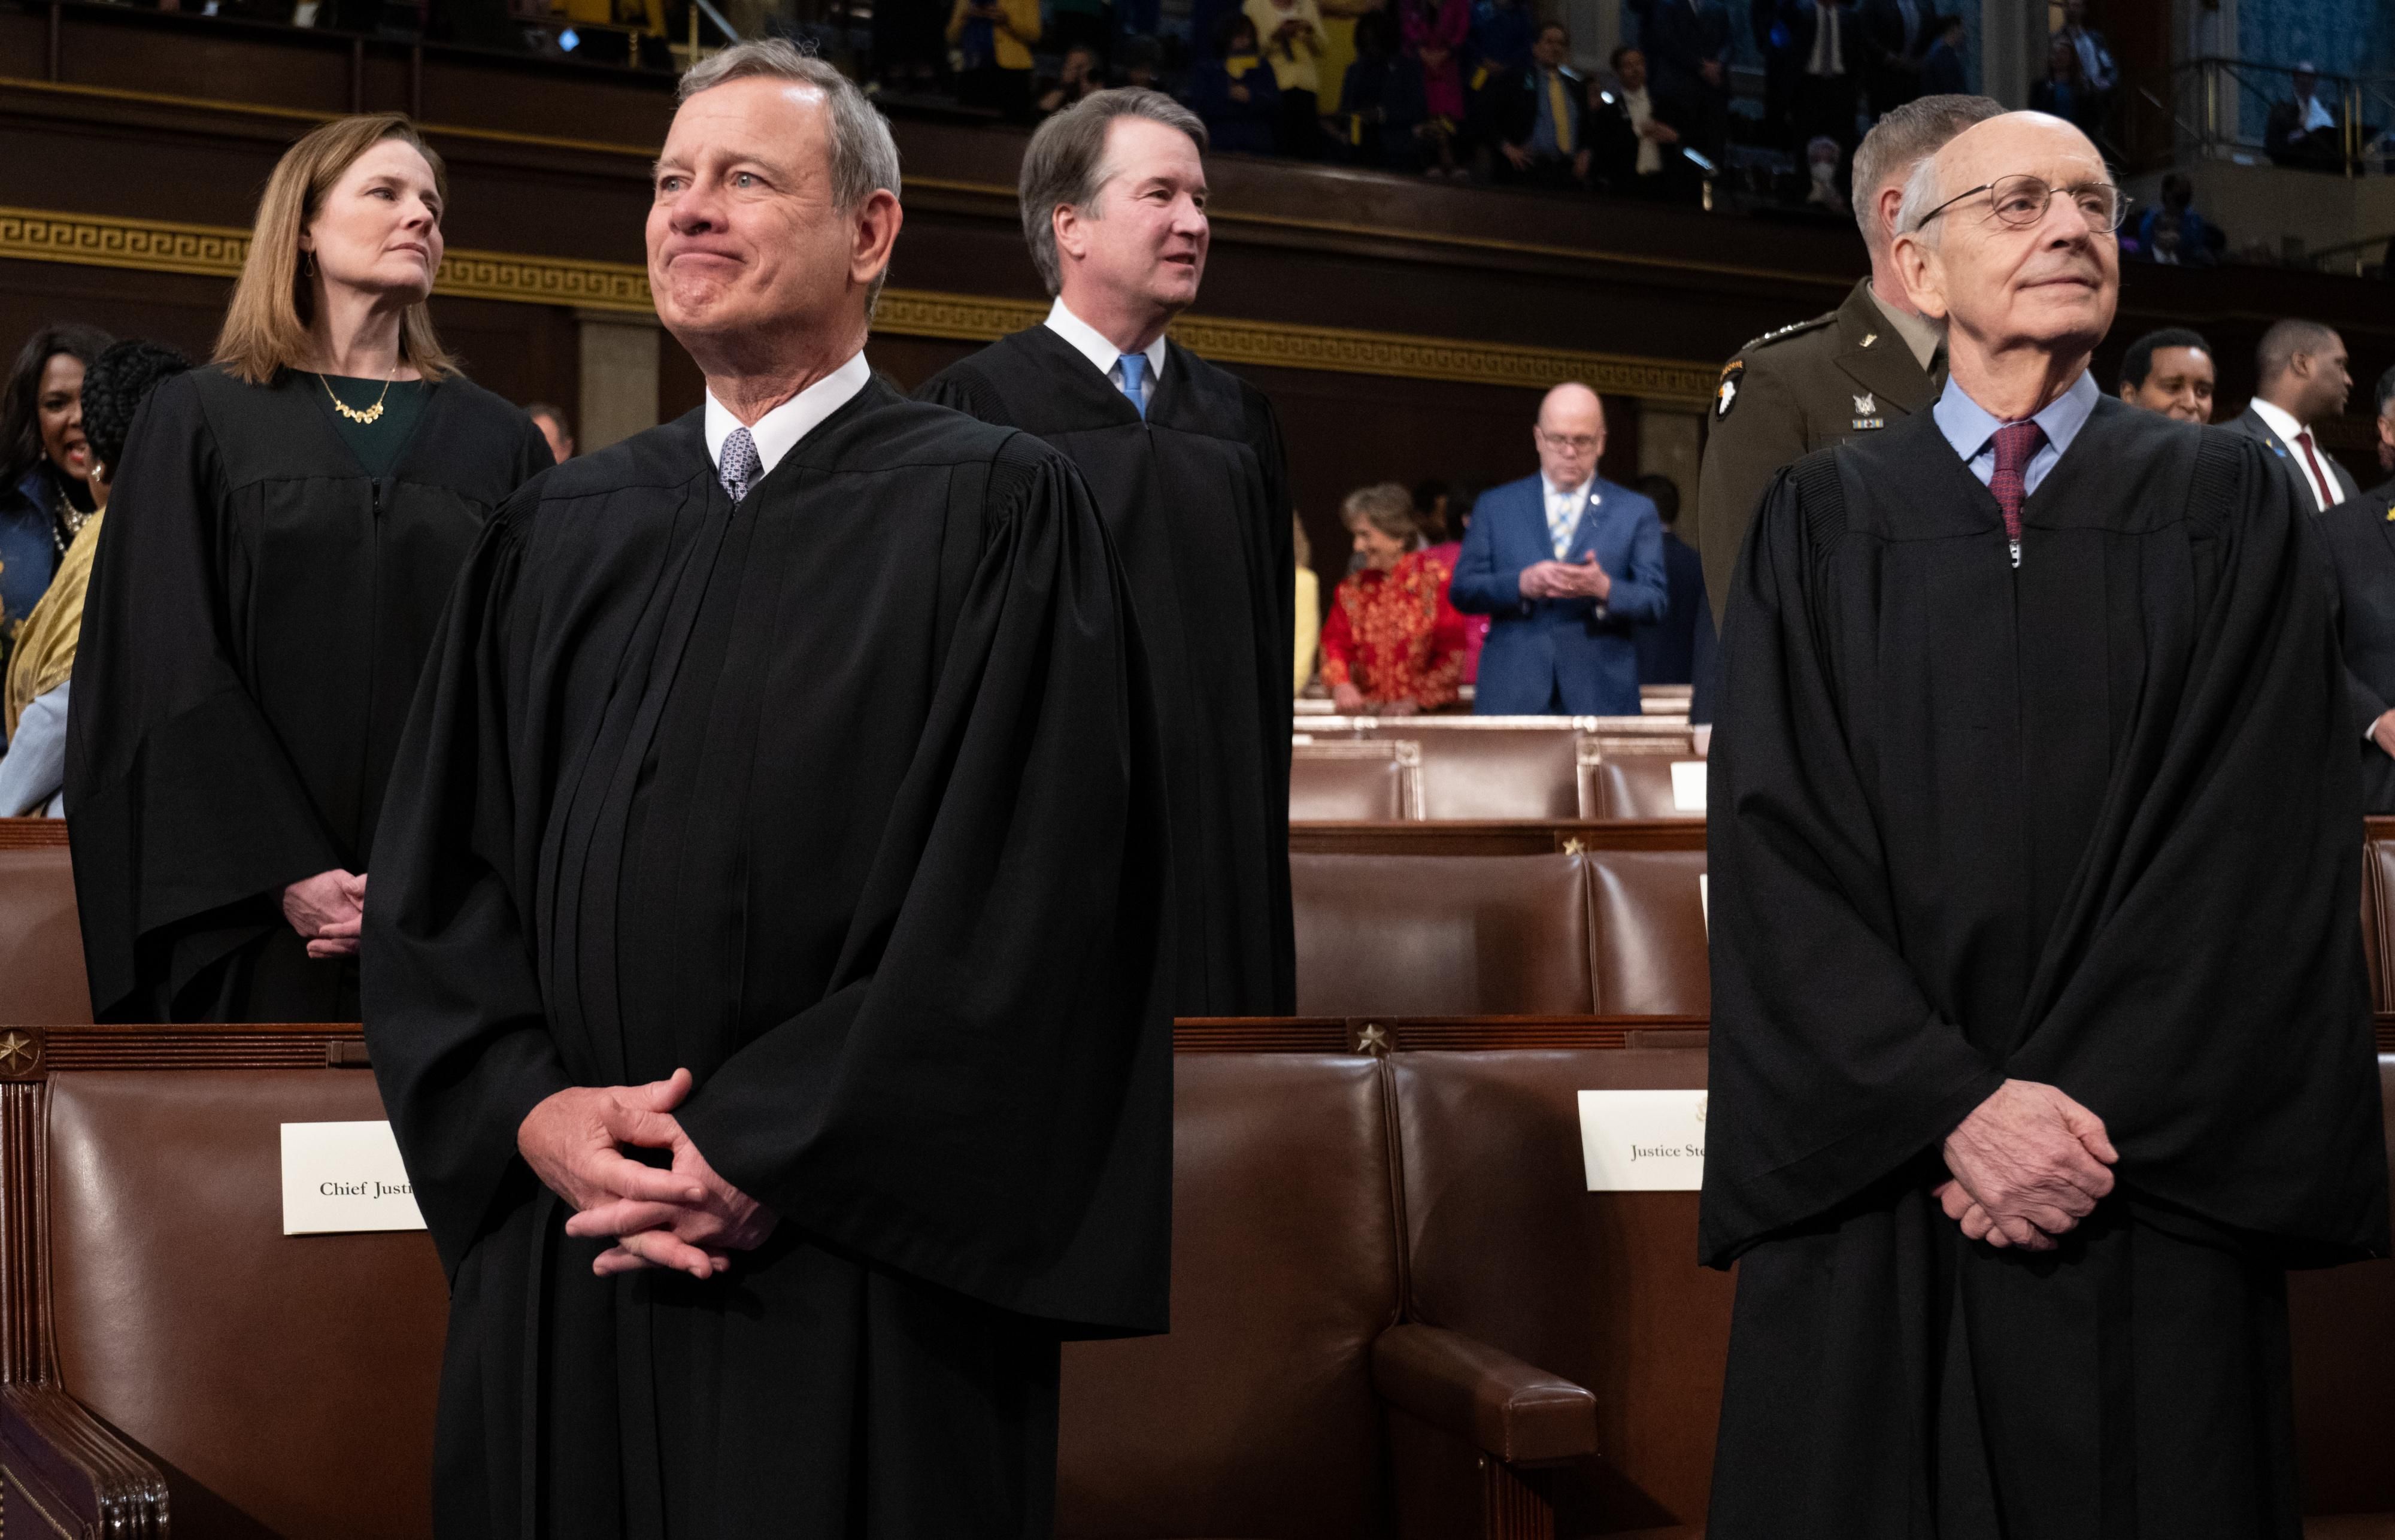 Supreme Court justices attend the State of the Union address